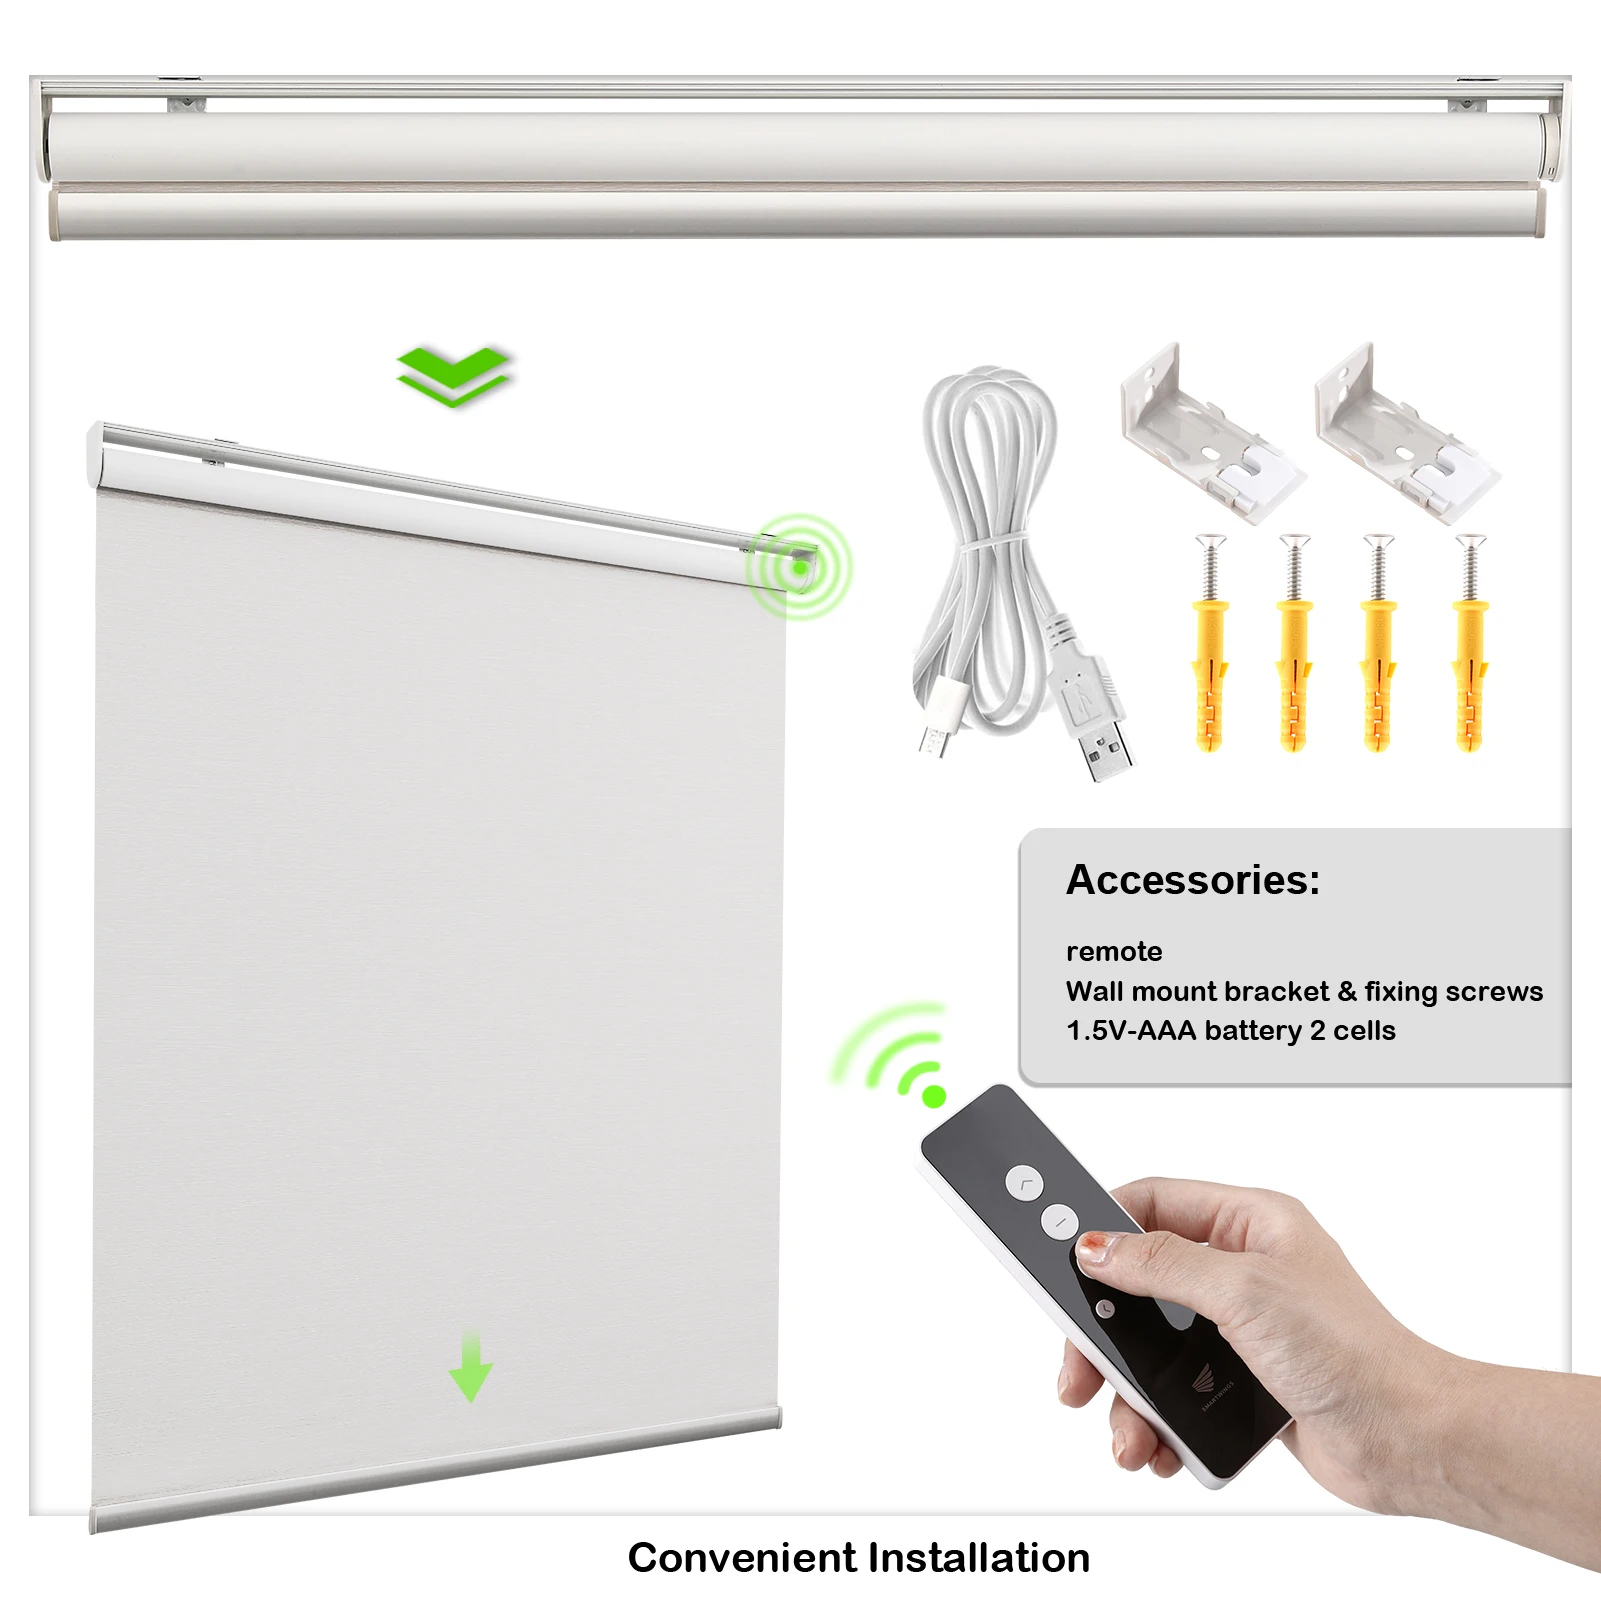 

Auto Smart Fireproof Blackout Fabric Battery Tubular Motor Control Wifi For Motorized Roller Blinds, Customized color